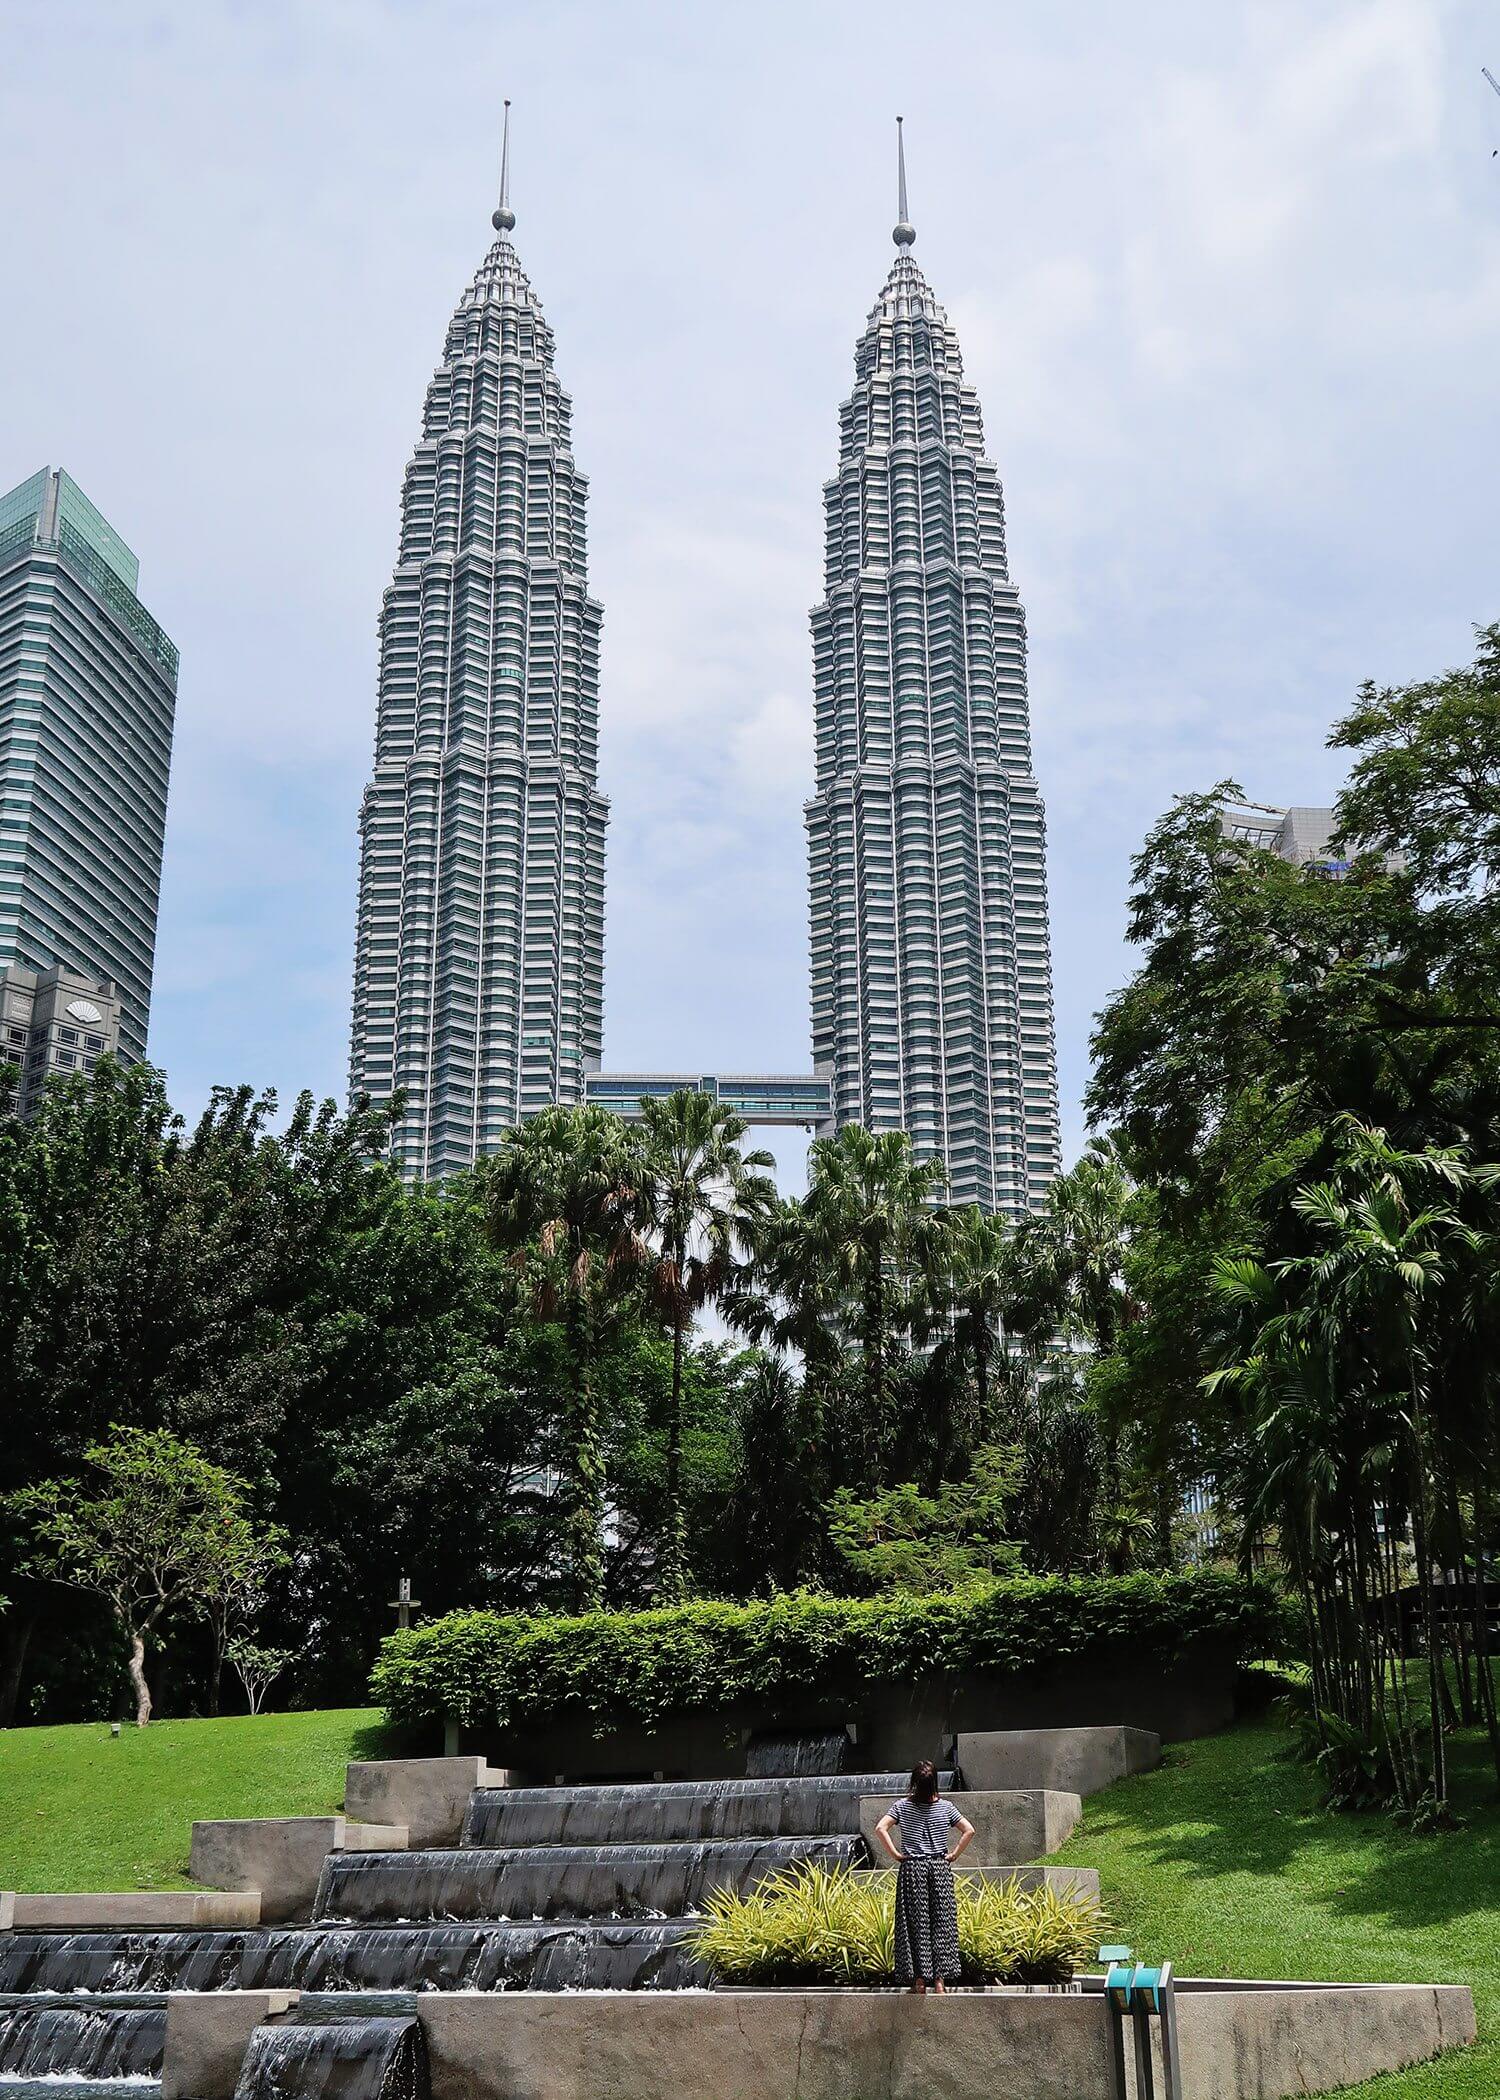 Petronas towers are 2 large skyscrapers with a bridge connecting them